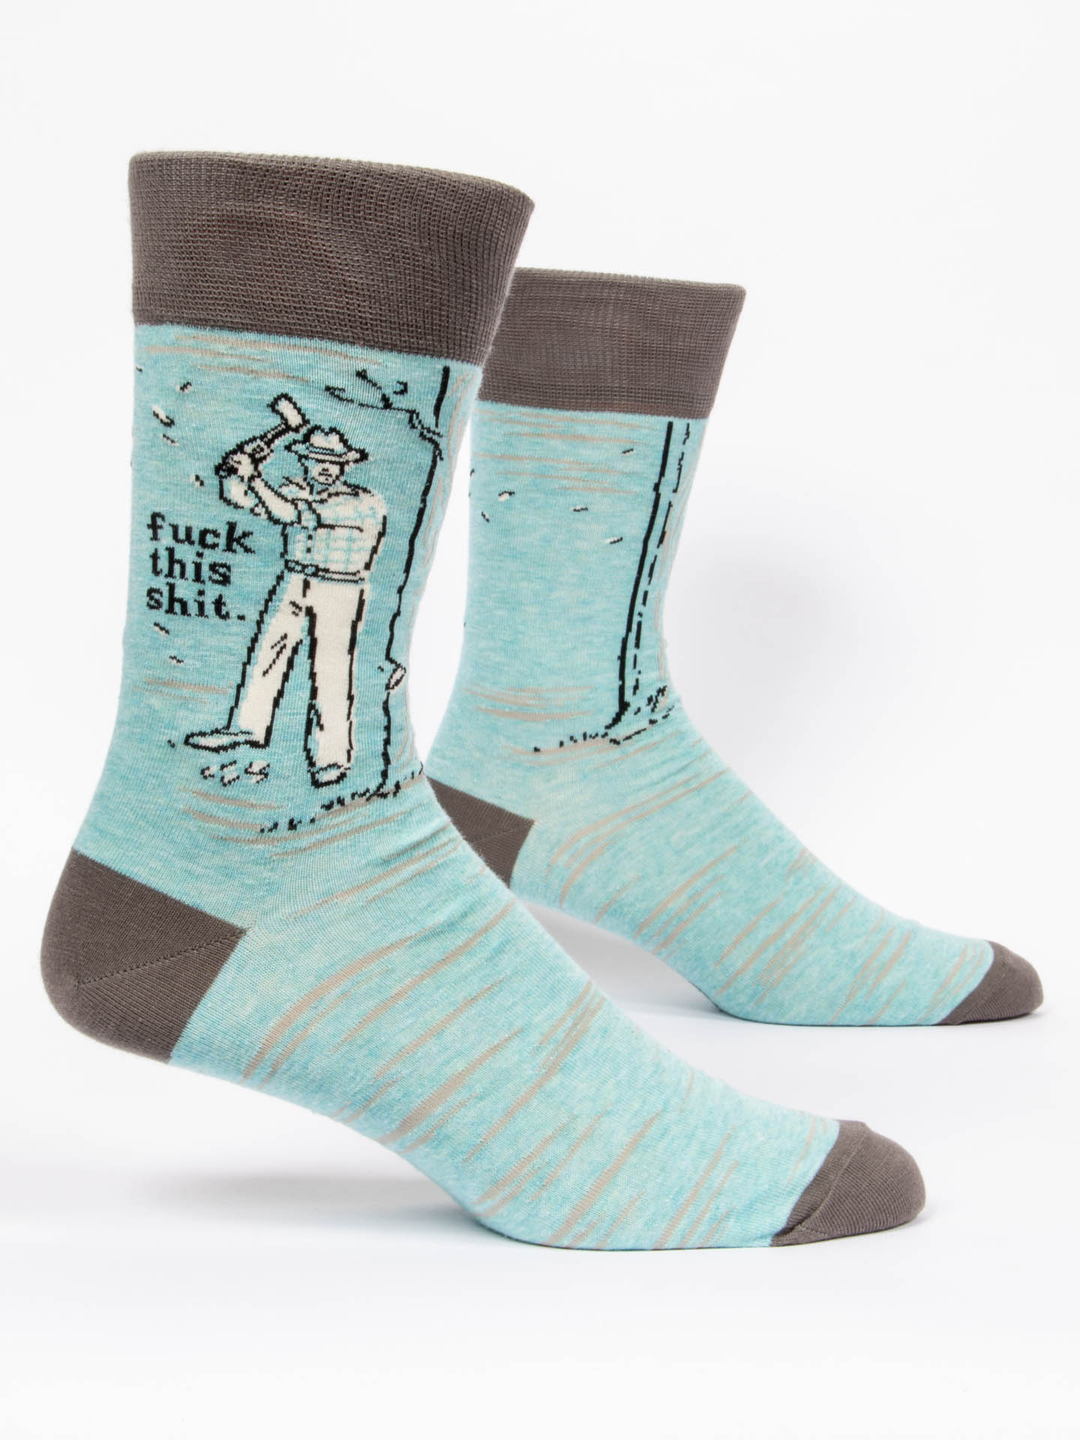 Fuck This Shit Men's Crew Socks - Kingfisher Road - Online Boutique